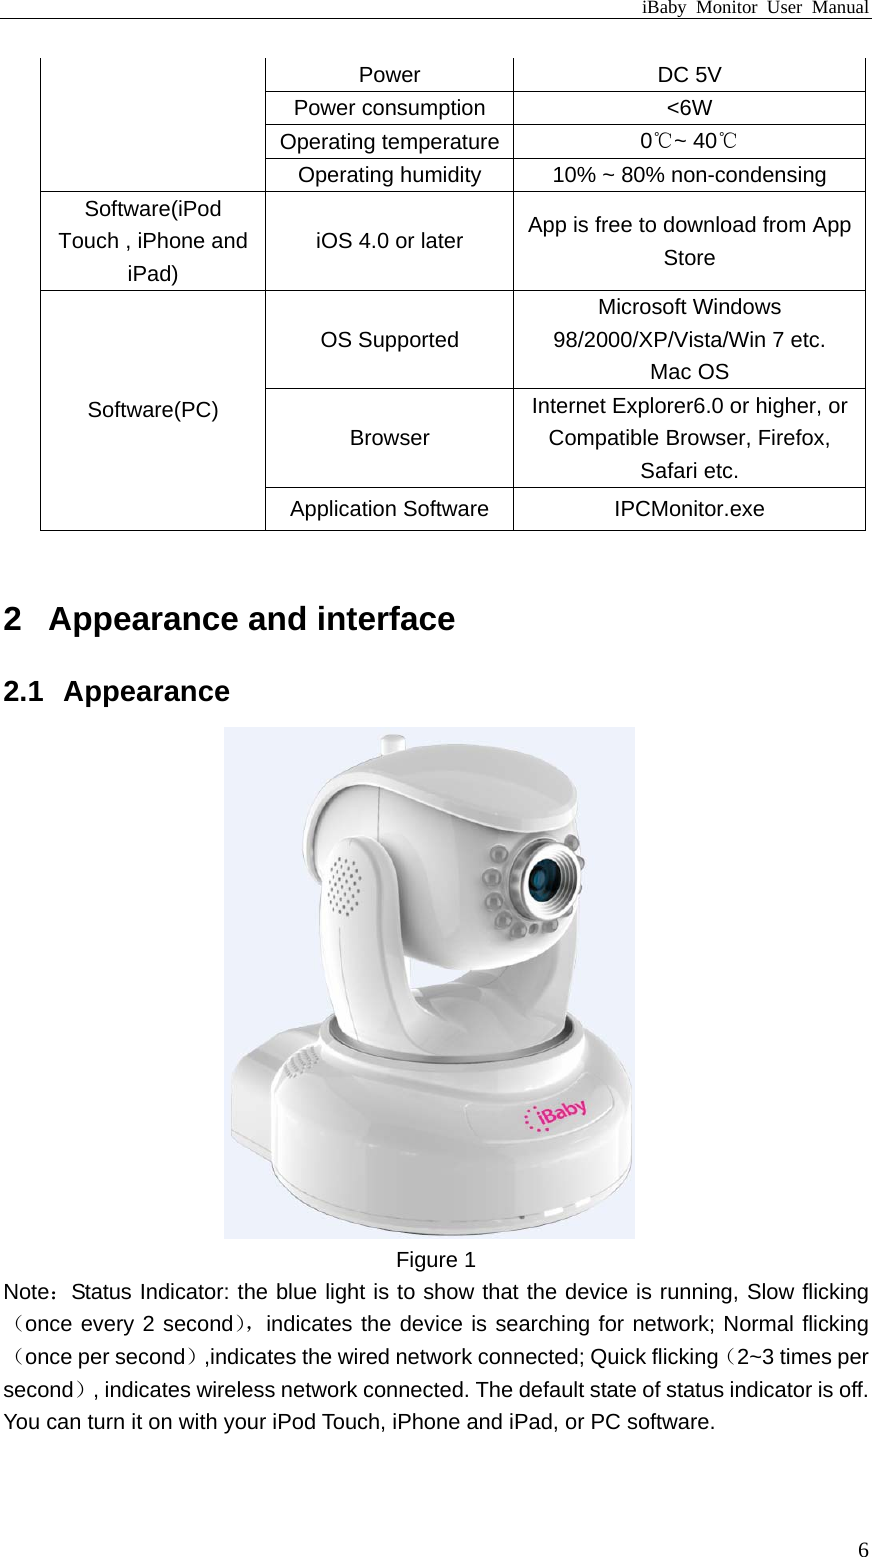 iBaby Monitor User Manual Power DC 5V Power consumption  &lt;6W Operating temperature 0℃~ 40℃ Operating humidity  10% ~ 80% non-condensing Software(iPod Touch , iPhone and iPad) iOS 4.0 or later  App is free to download from App Store OS Supported Microsoft Windows 98/2000/XP/Vista/Win 7 etc. Mac OS Browser Internet Explorer6.0 or higher, or Compatible Browser, Firefox, Safari etc. Software(PC) Application Software  IPCMonitor.exe  2  Appearance and interface 2.1  Appearance  Figure 1 Note：Status Indicator: the blue light is to show that the device is running, Slow flicking（once every 2 second），indicates the device is searching for network; Normal flicking（once per second）,indicates the wired network connected; Quick flicking（2~3 times per second）, indicates wireless network connected. The default state of status indicator is off. You can turn it on with your iPod Touch, iPhone and iPad, or PC software.   6